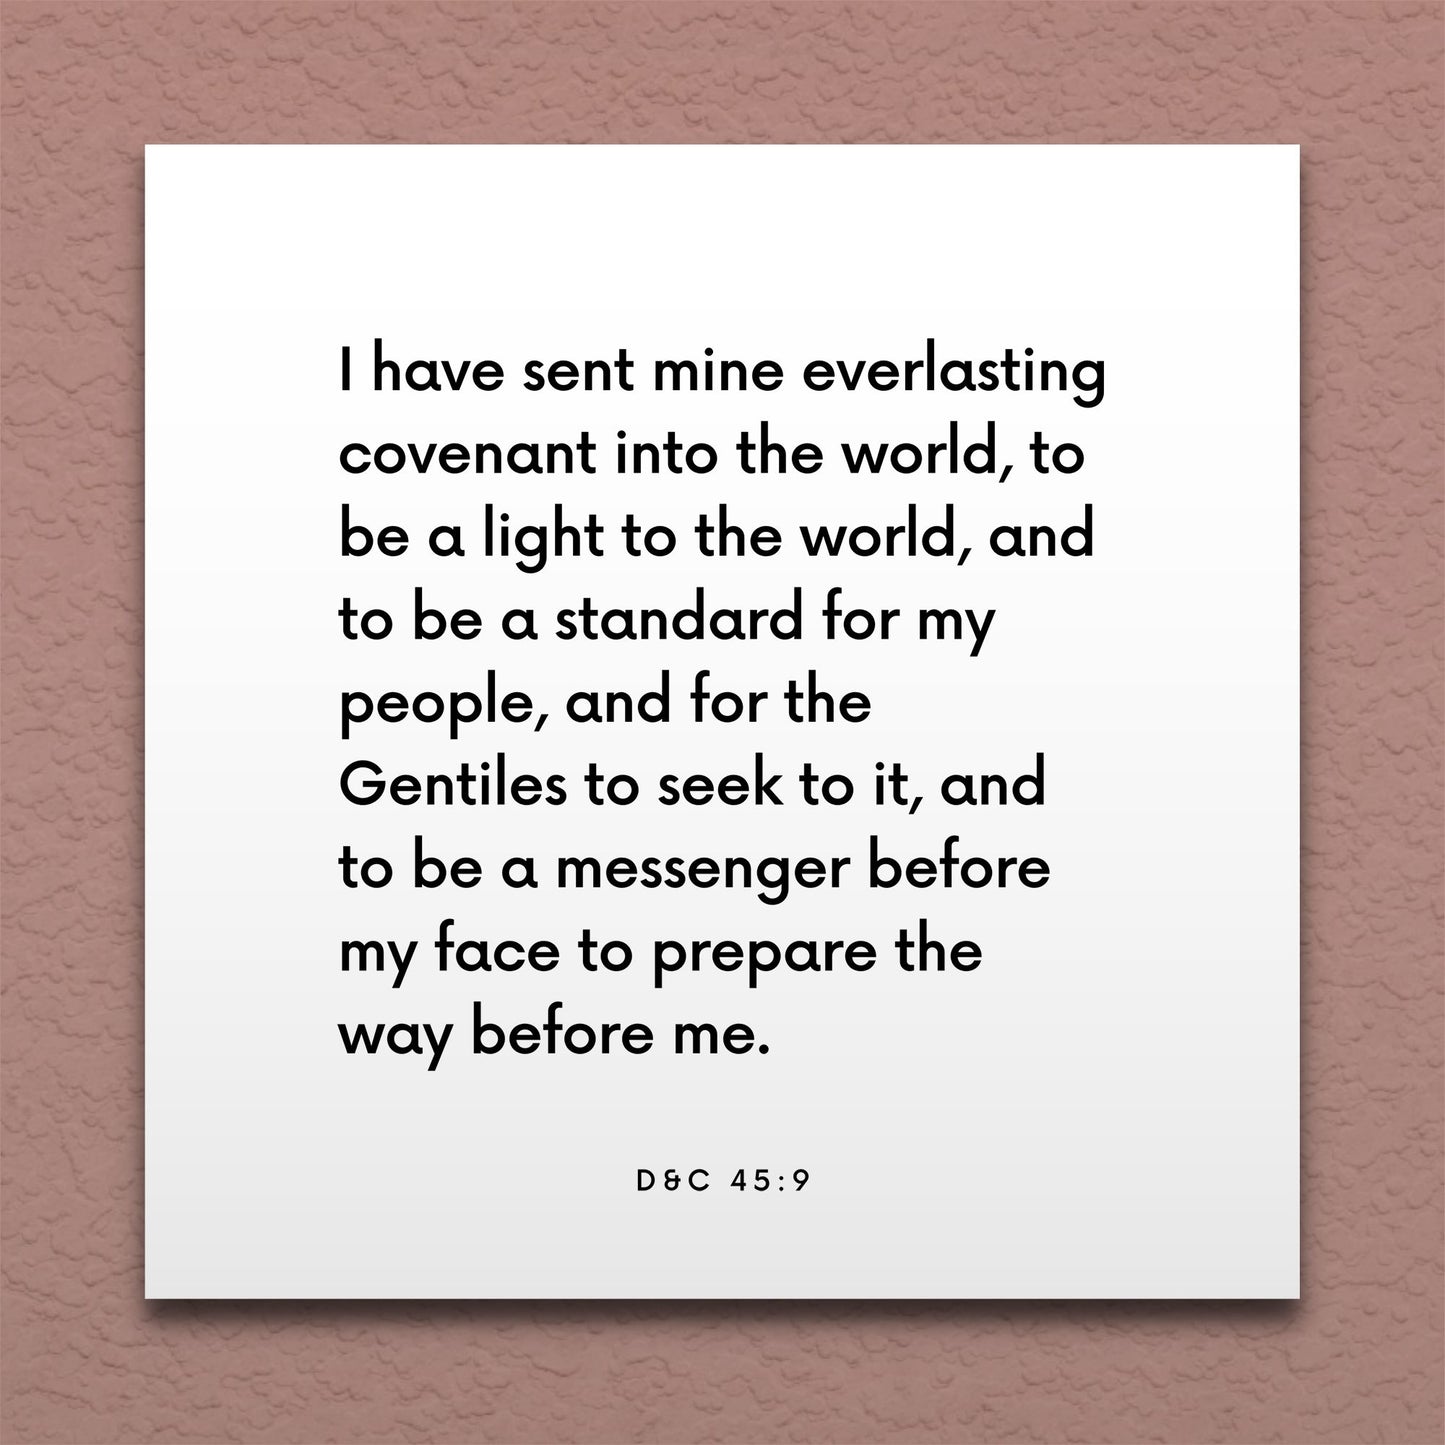 Wall-mounted scripture tile for D&C 45:9 - "I have sent mine everlasting covenant into the world"